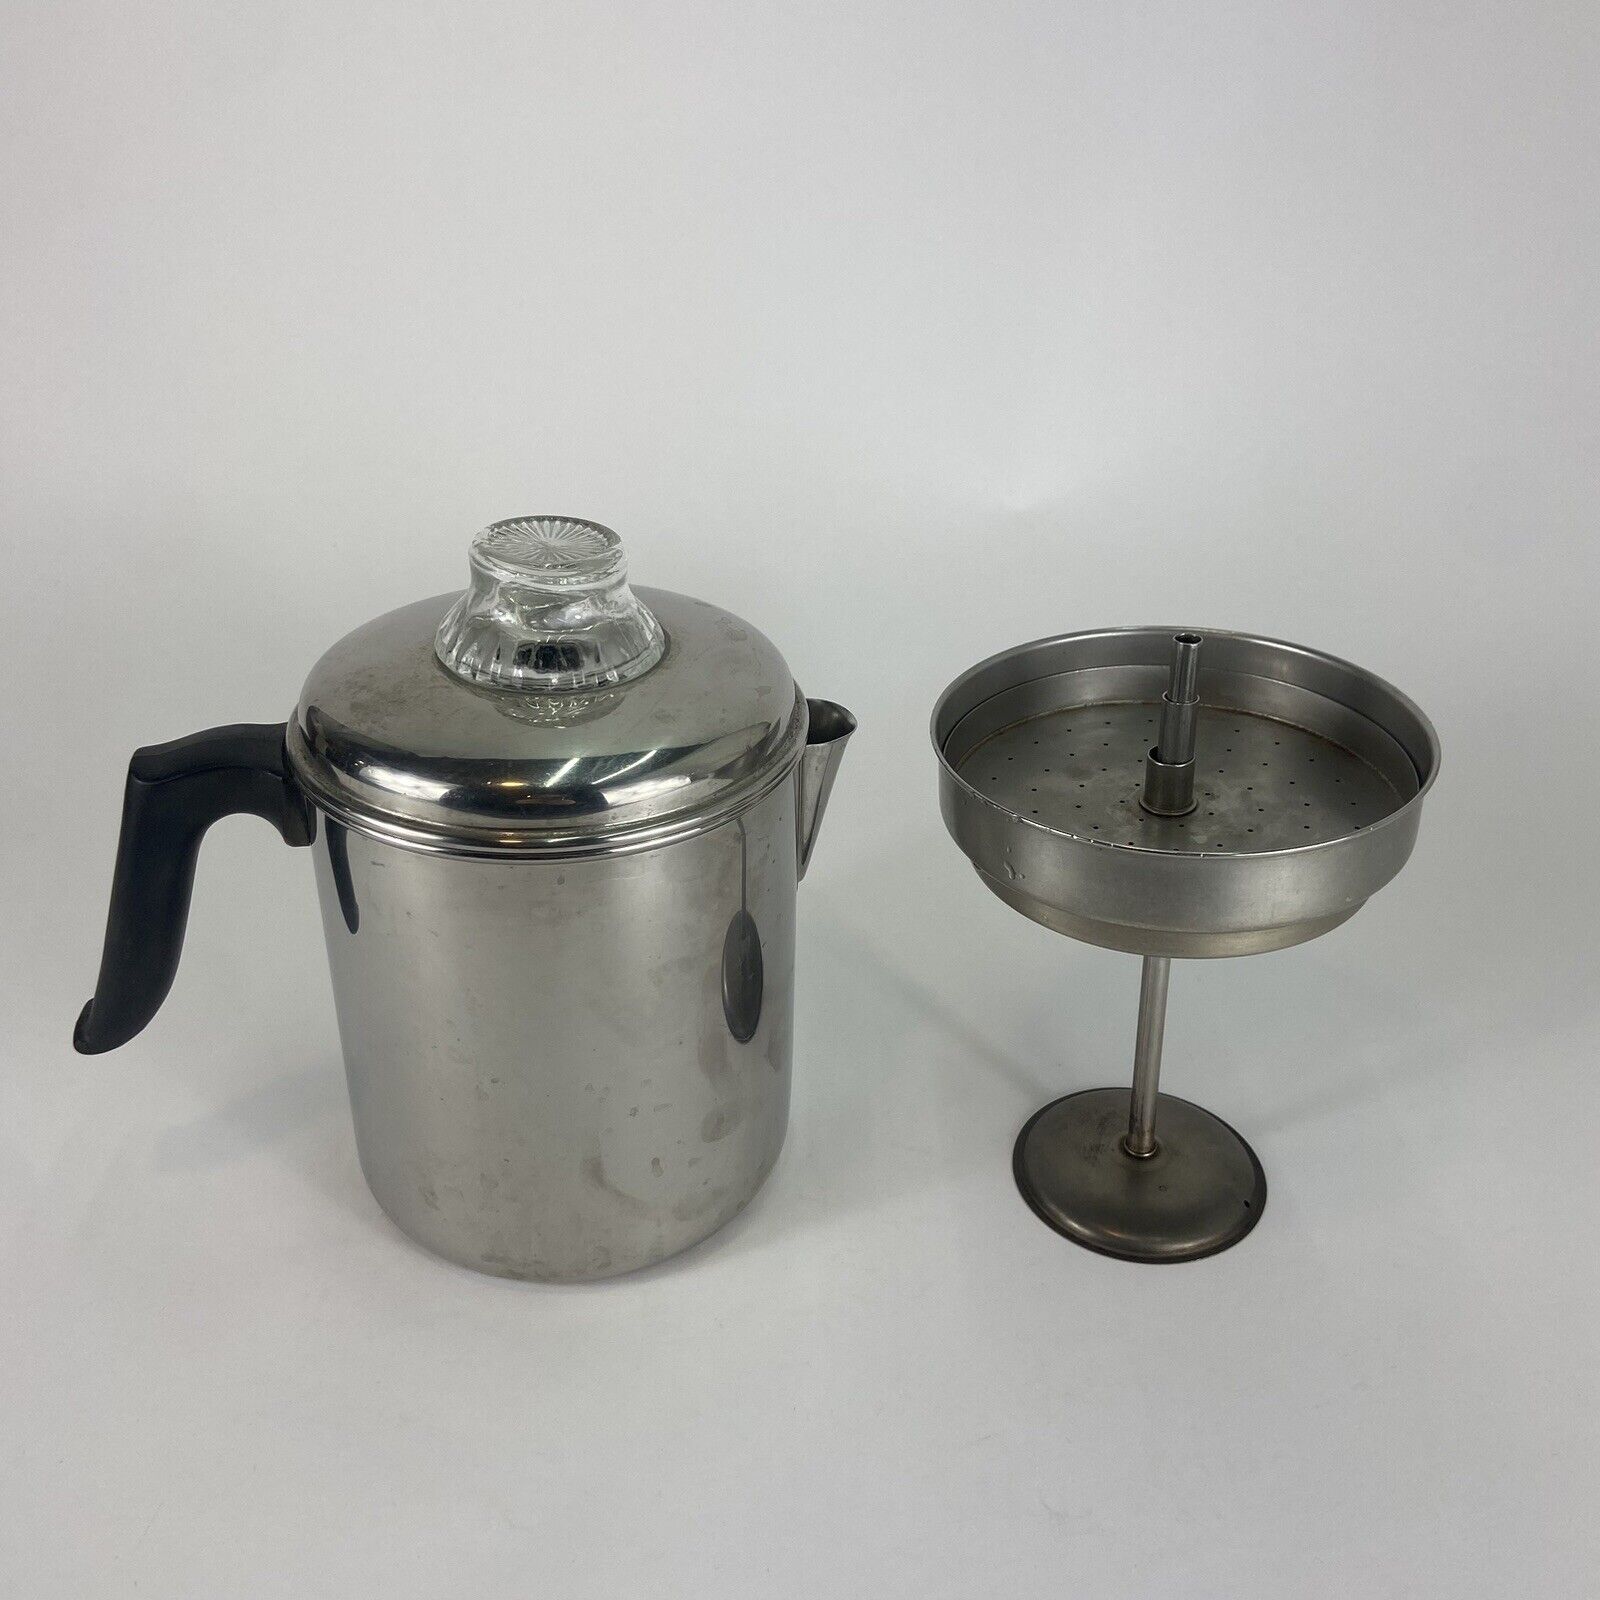 Revere Ware 1801 Stainless Complete Stovetop Percolator Vintage